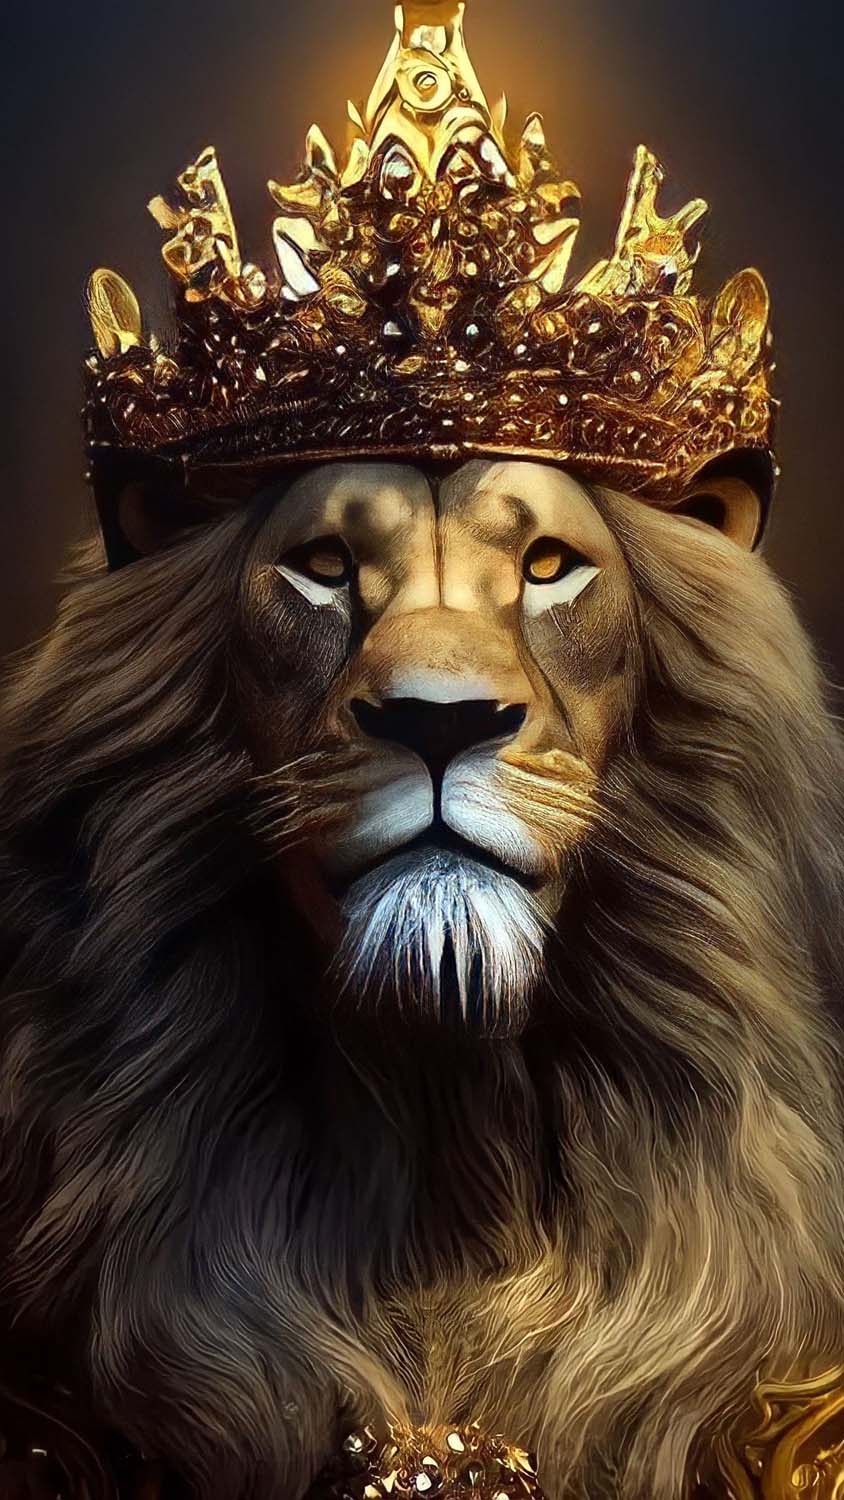 The King IPhone Wallpaper HD - IPhone Wallpapers : iPhone Wallpapers